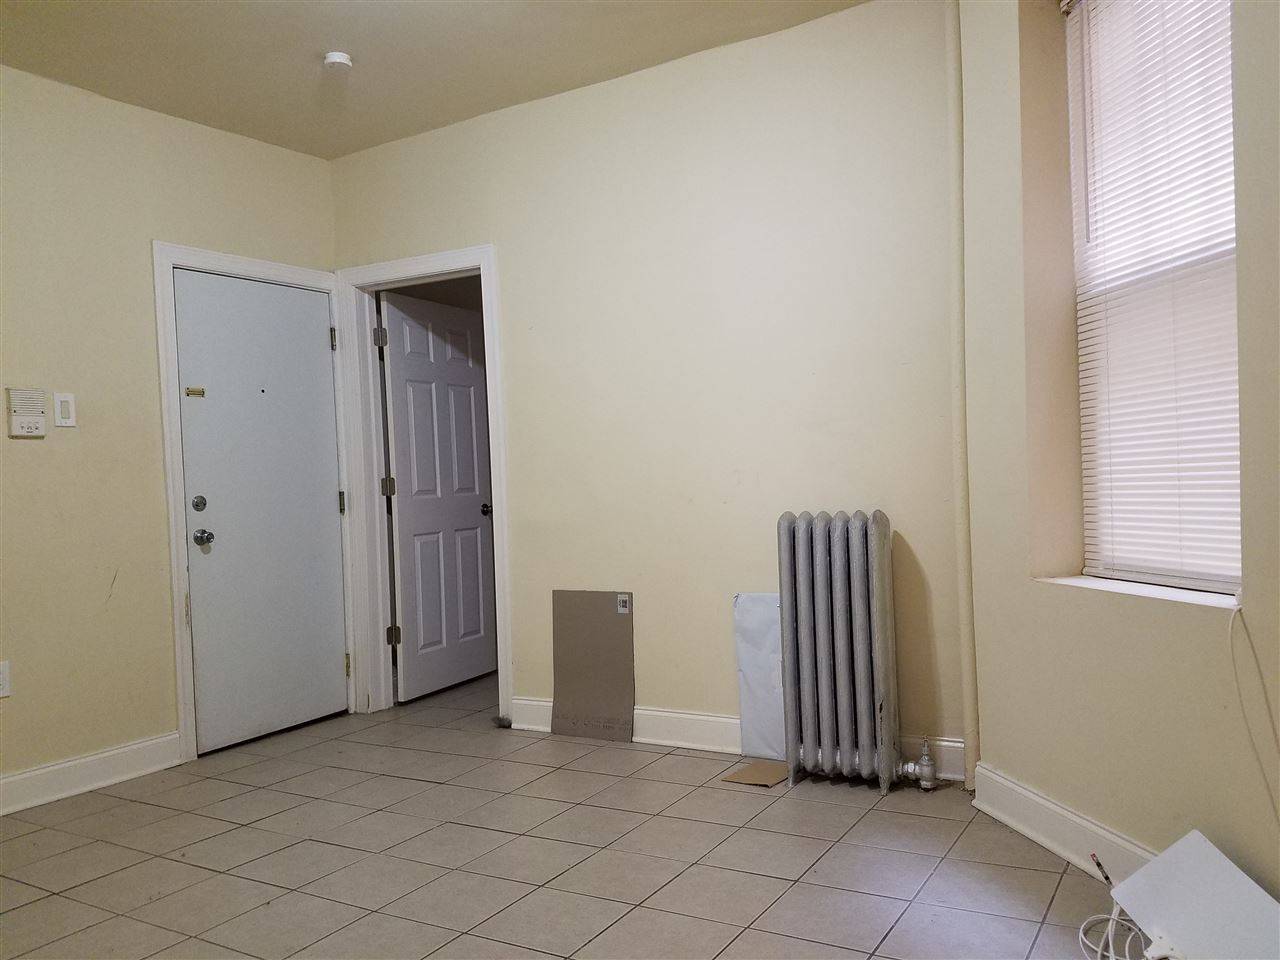 Cozy apartment in the heart of West New York - 1 BR Condo New Jersey